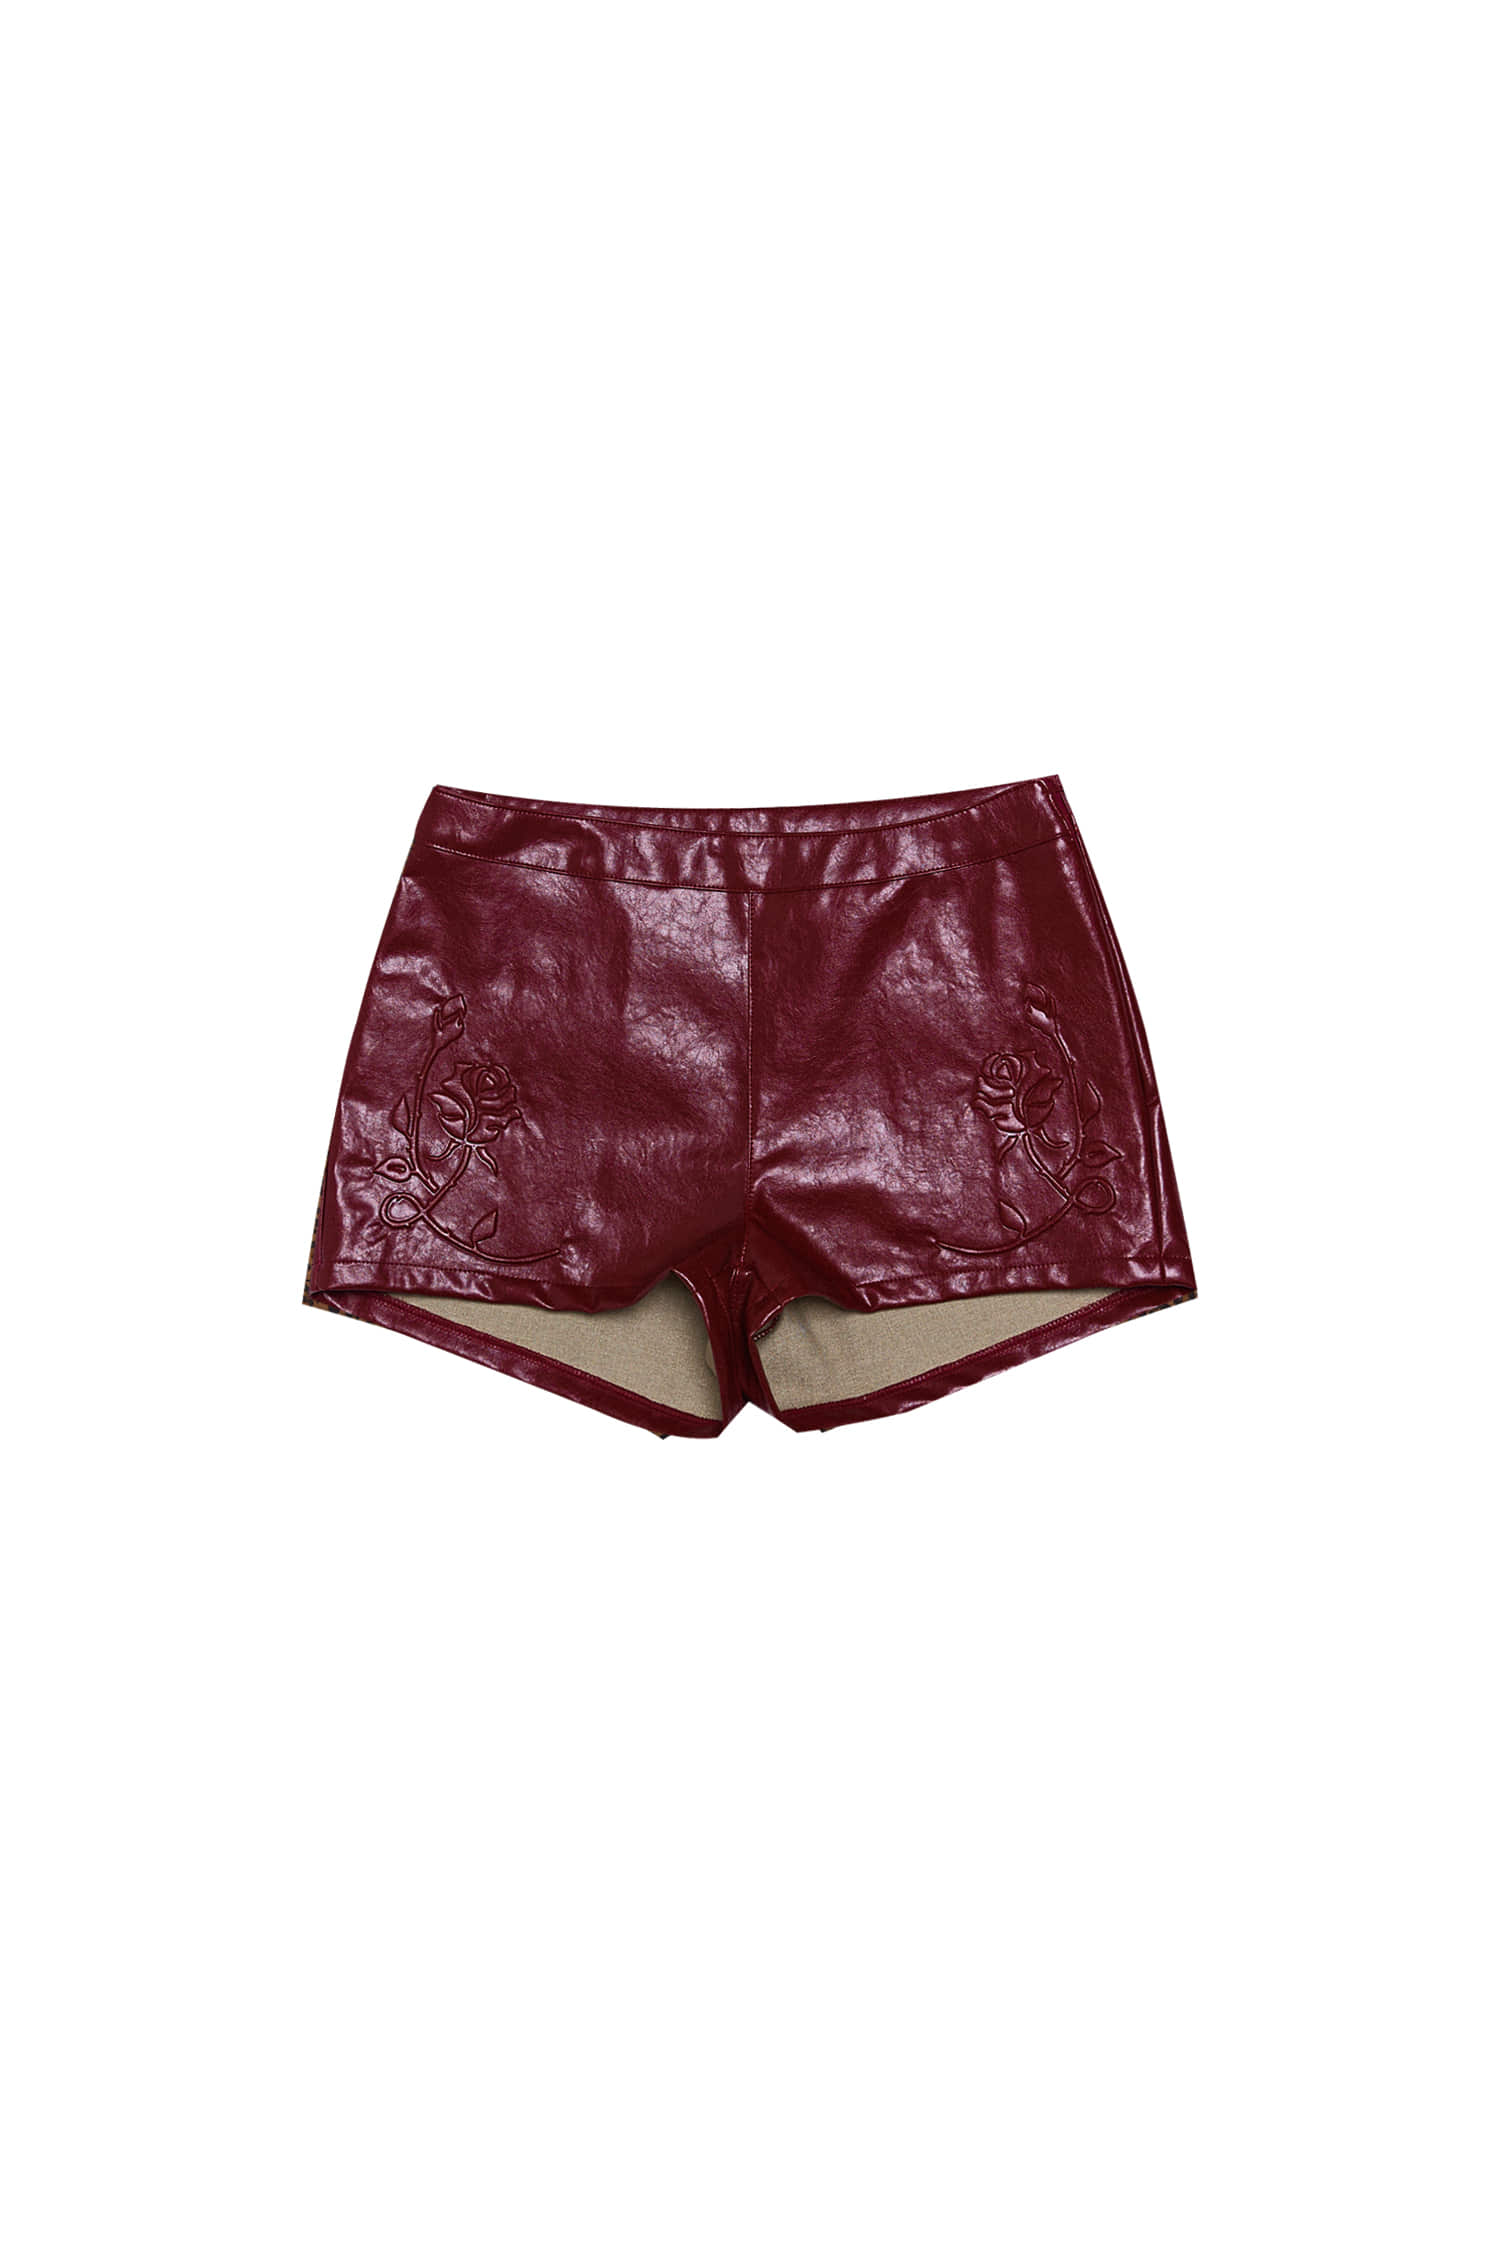 RED ROSE LEATHER SHORT PANTS [7.10출고]